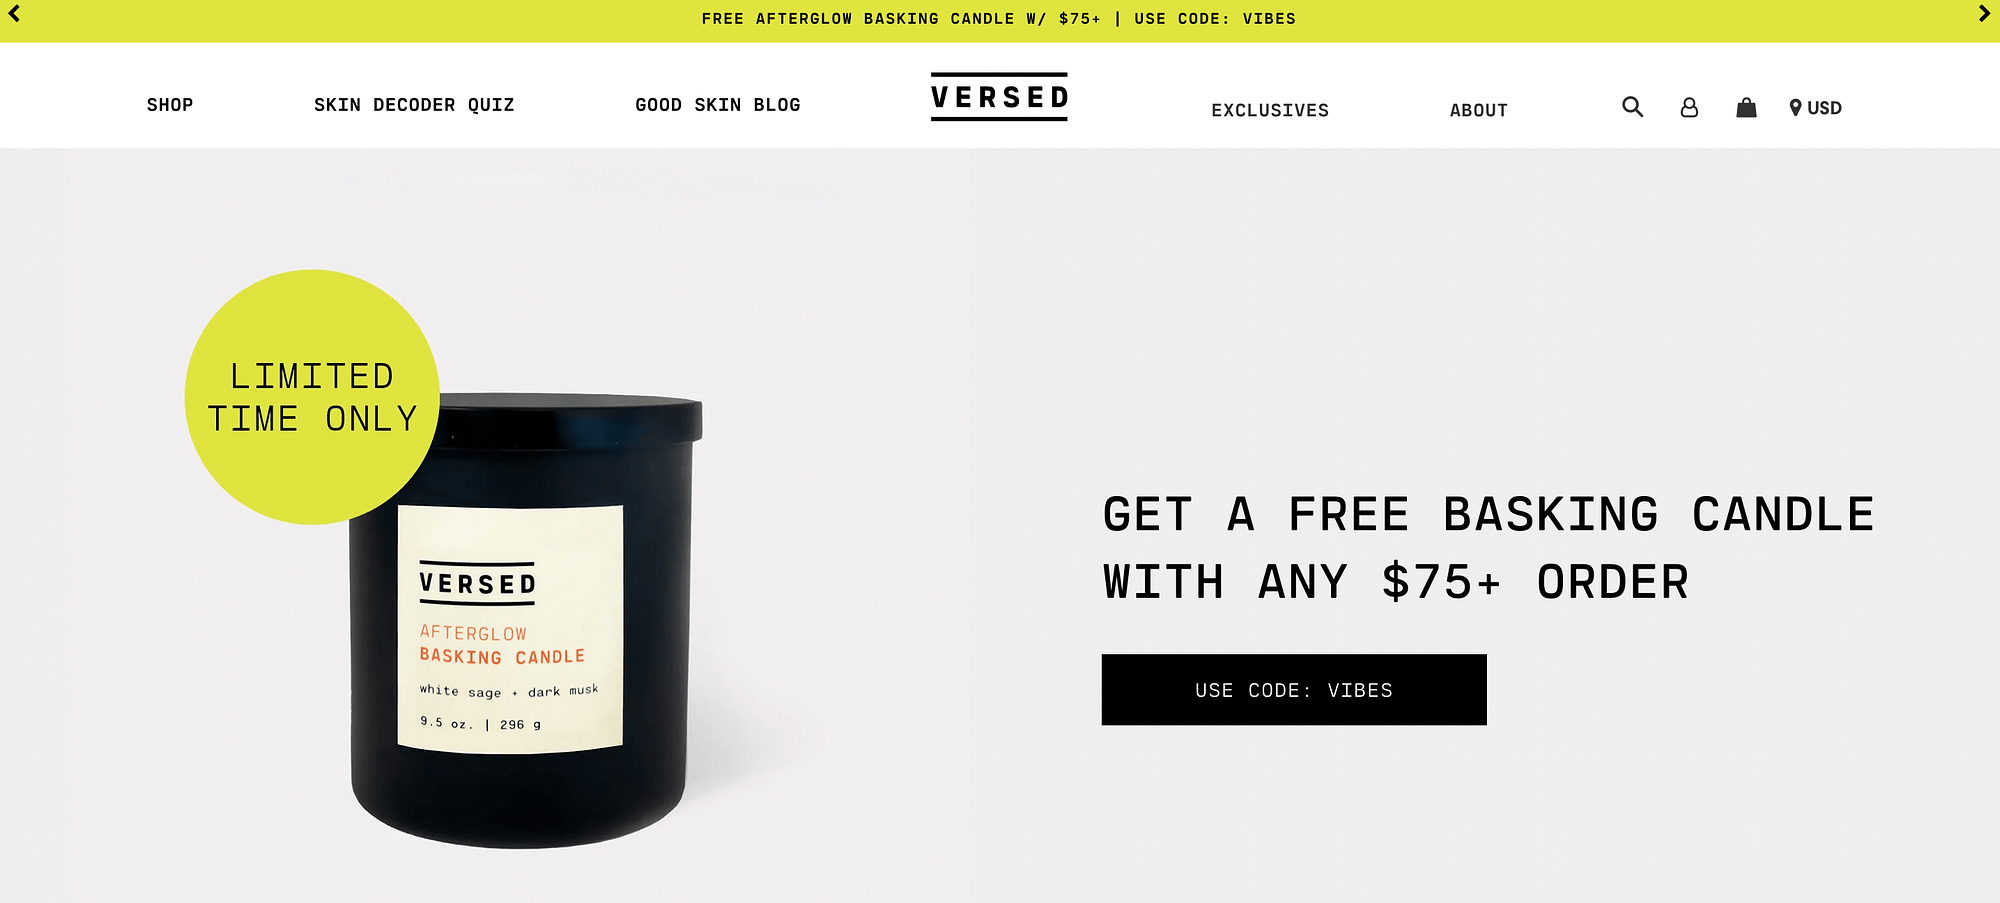 A free, limited-time gift on an ecommerce website.